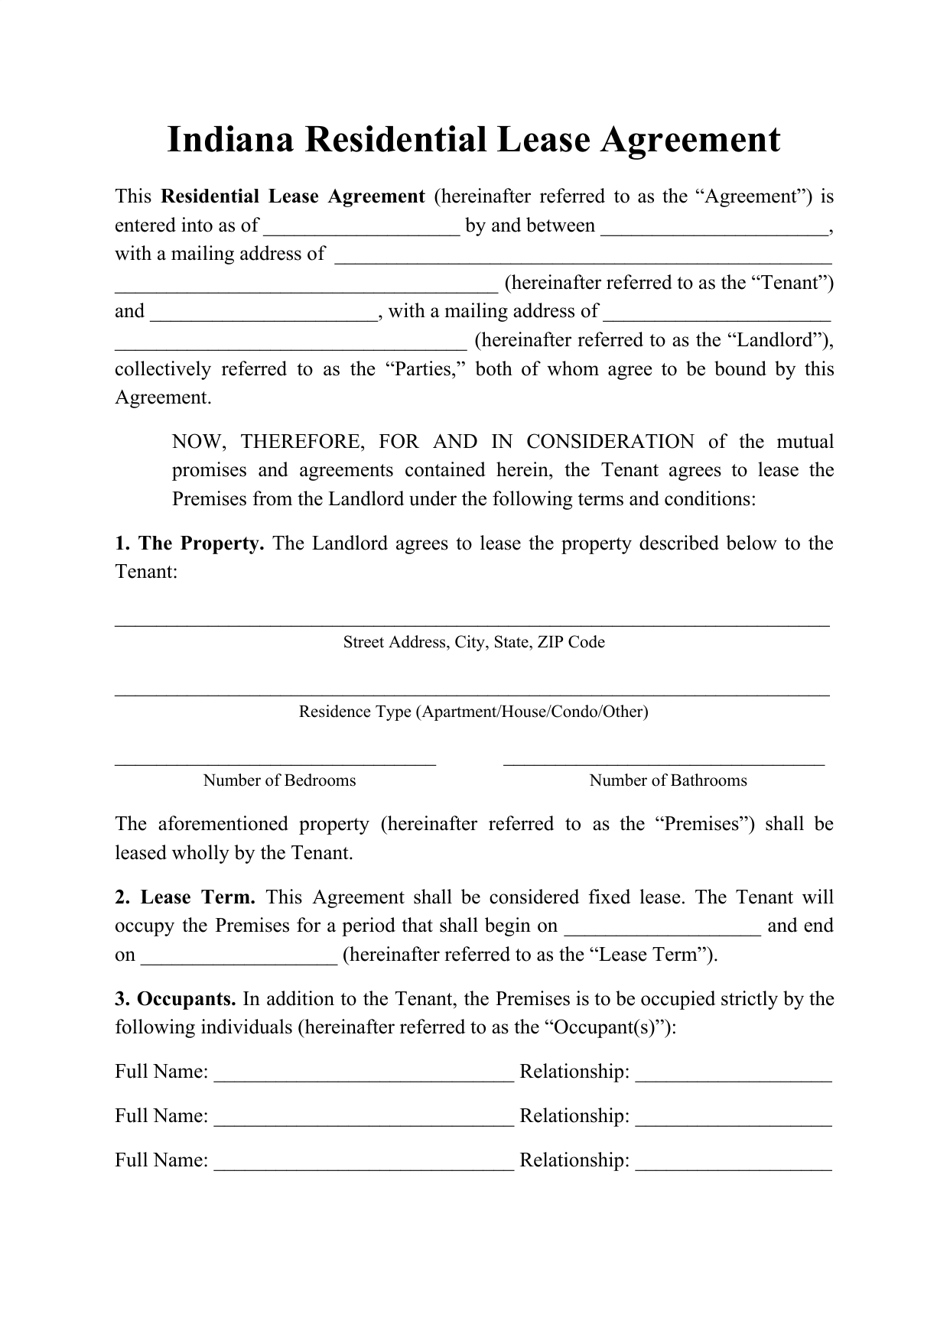 Residential Lease Agreement Template - Indiana, Page 1